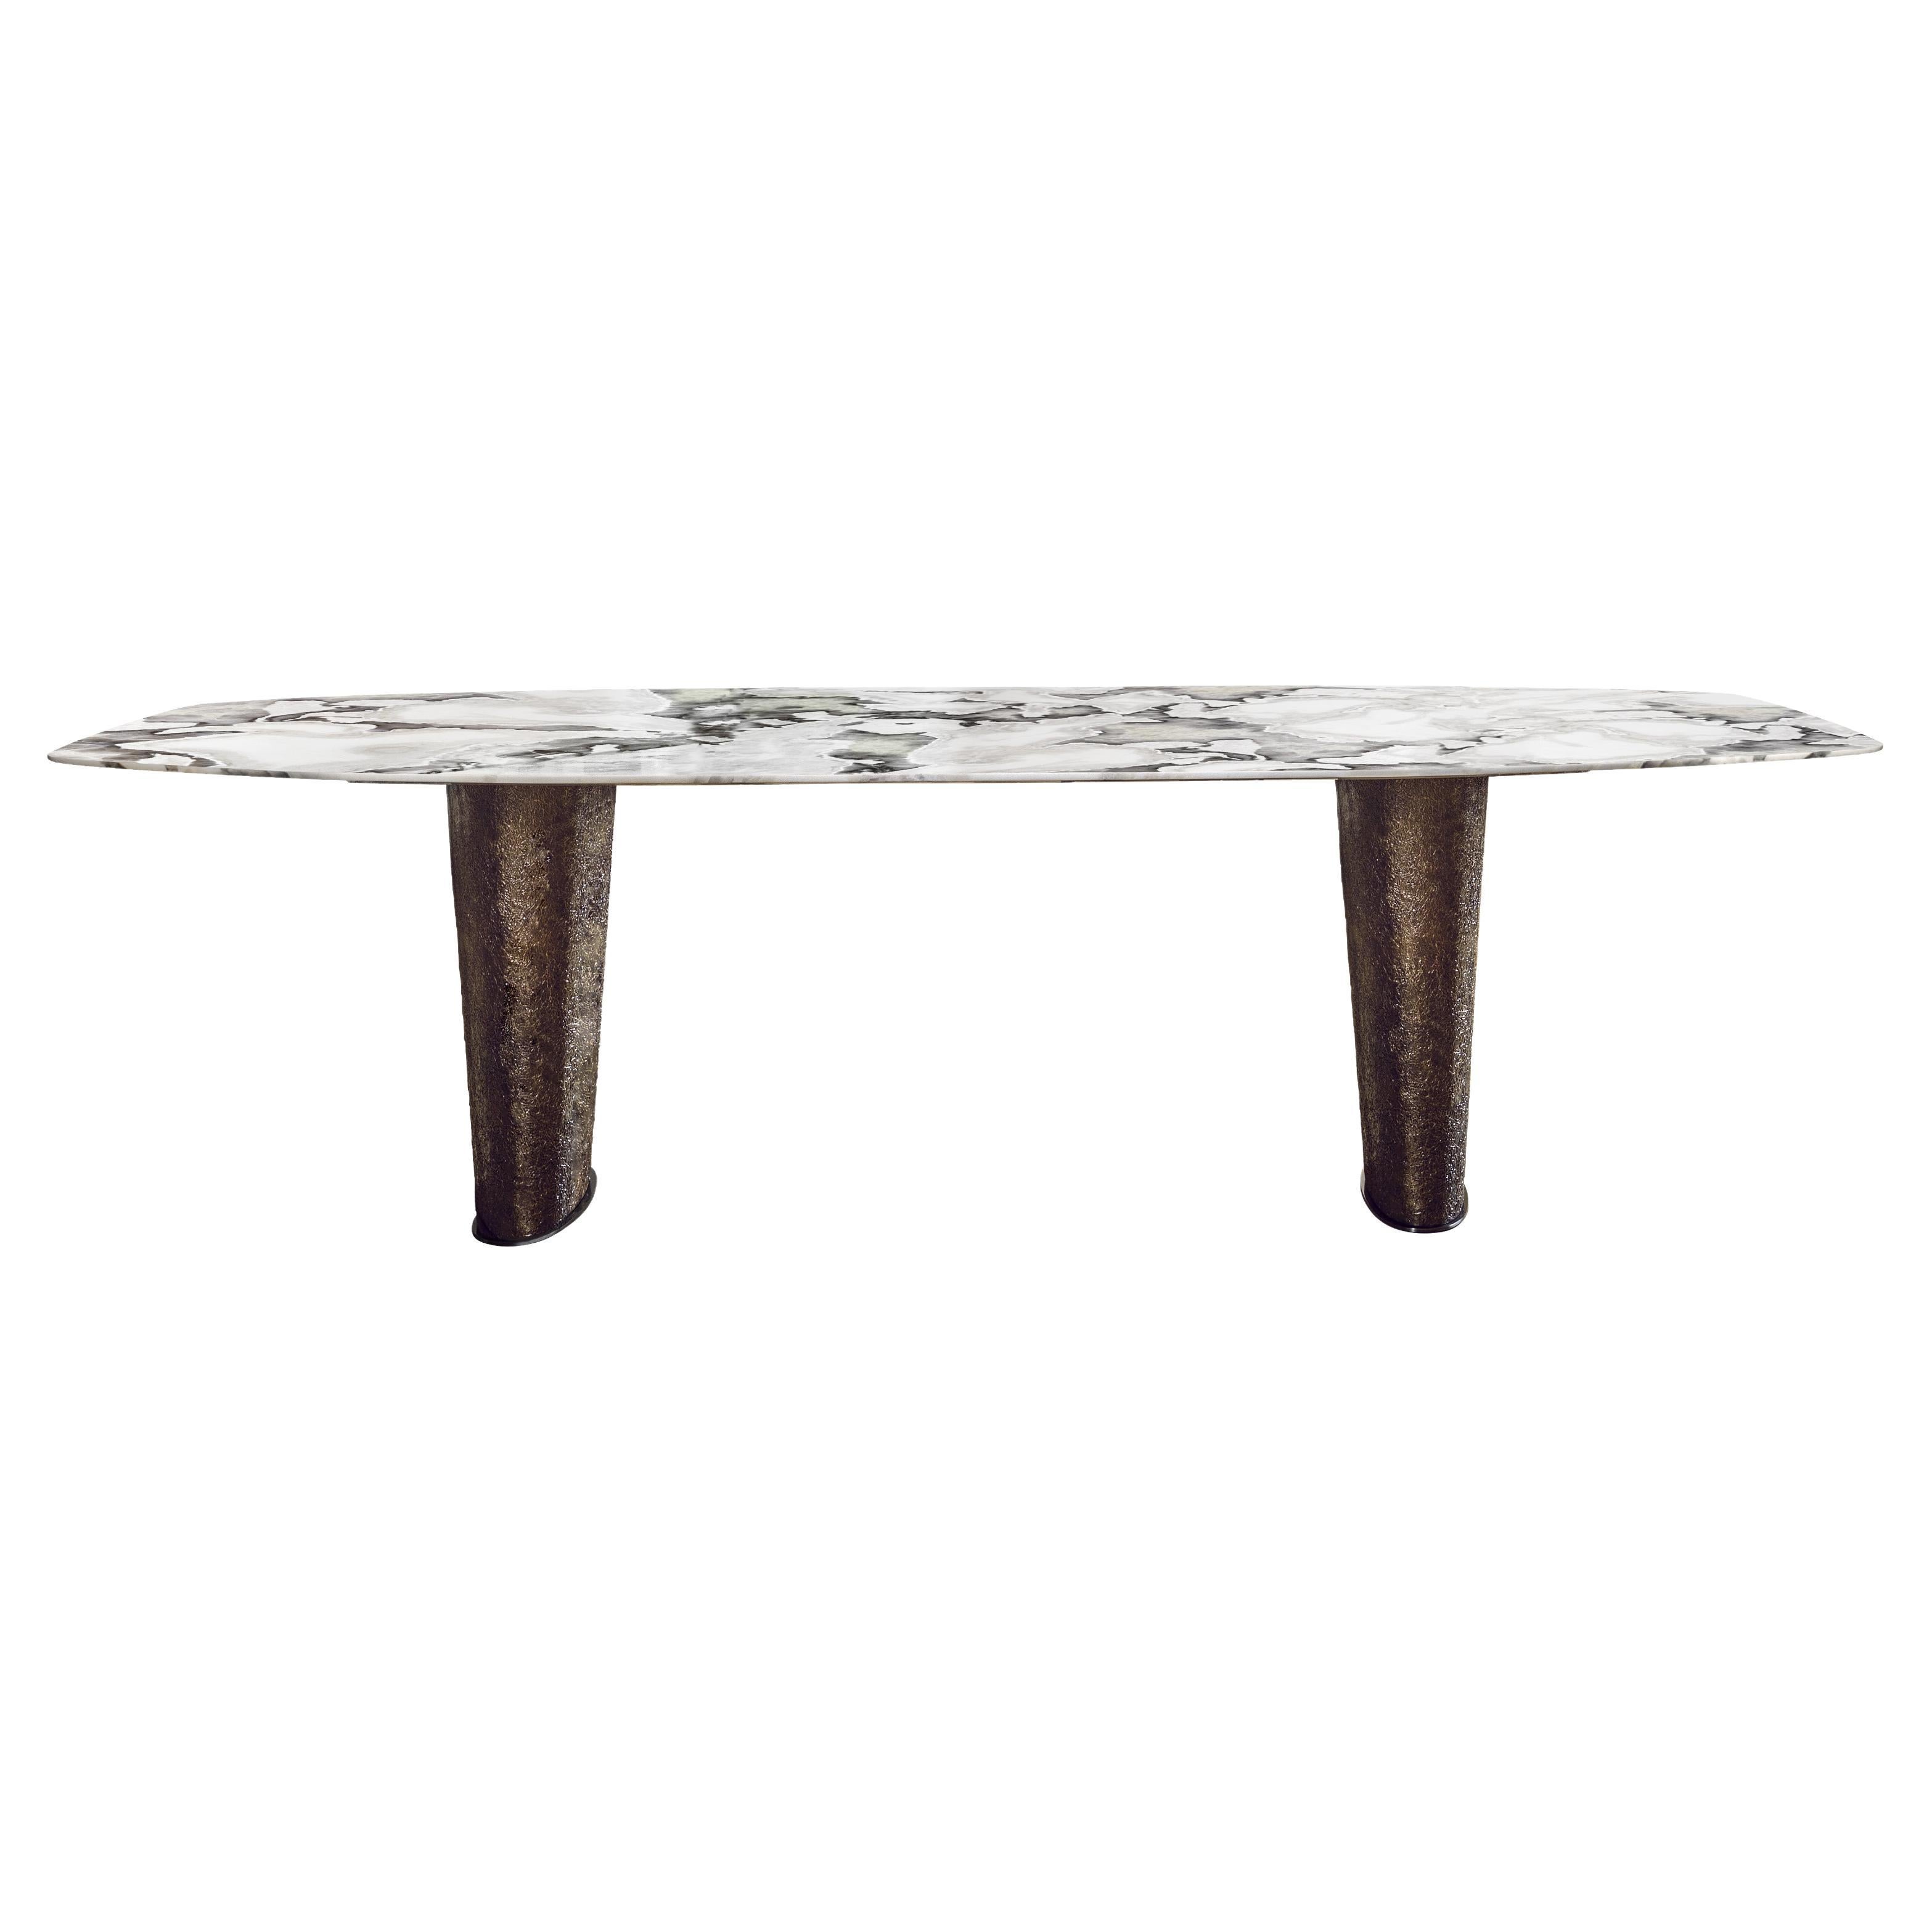 Contemporary Cheope Table with "Dover White" Marble top and Artistic Finish Base